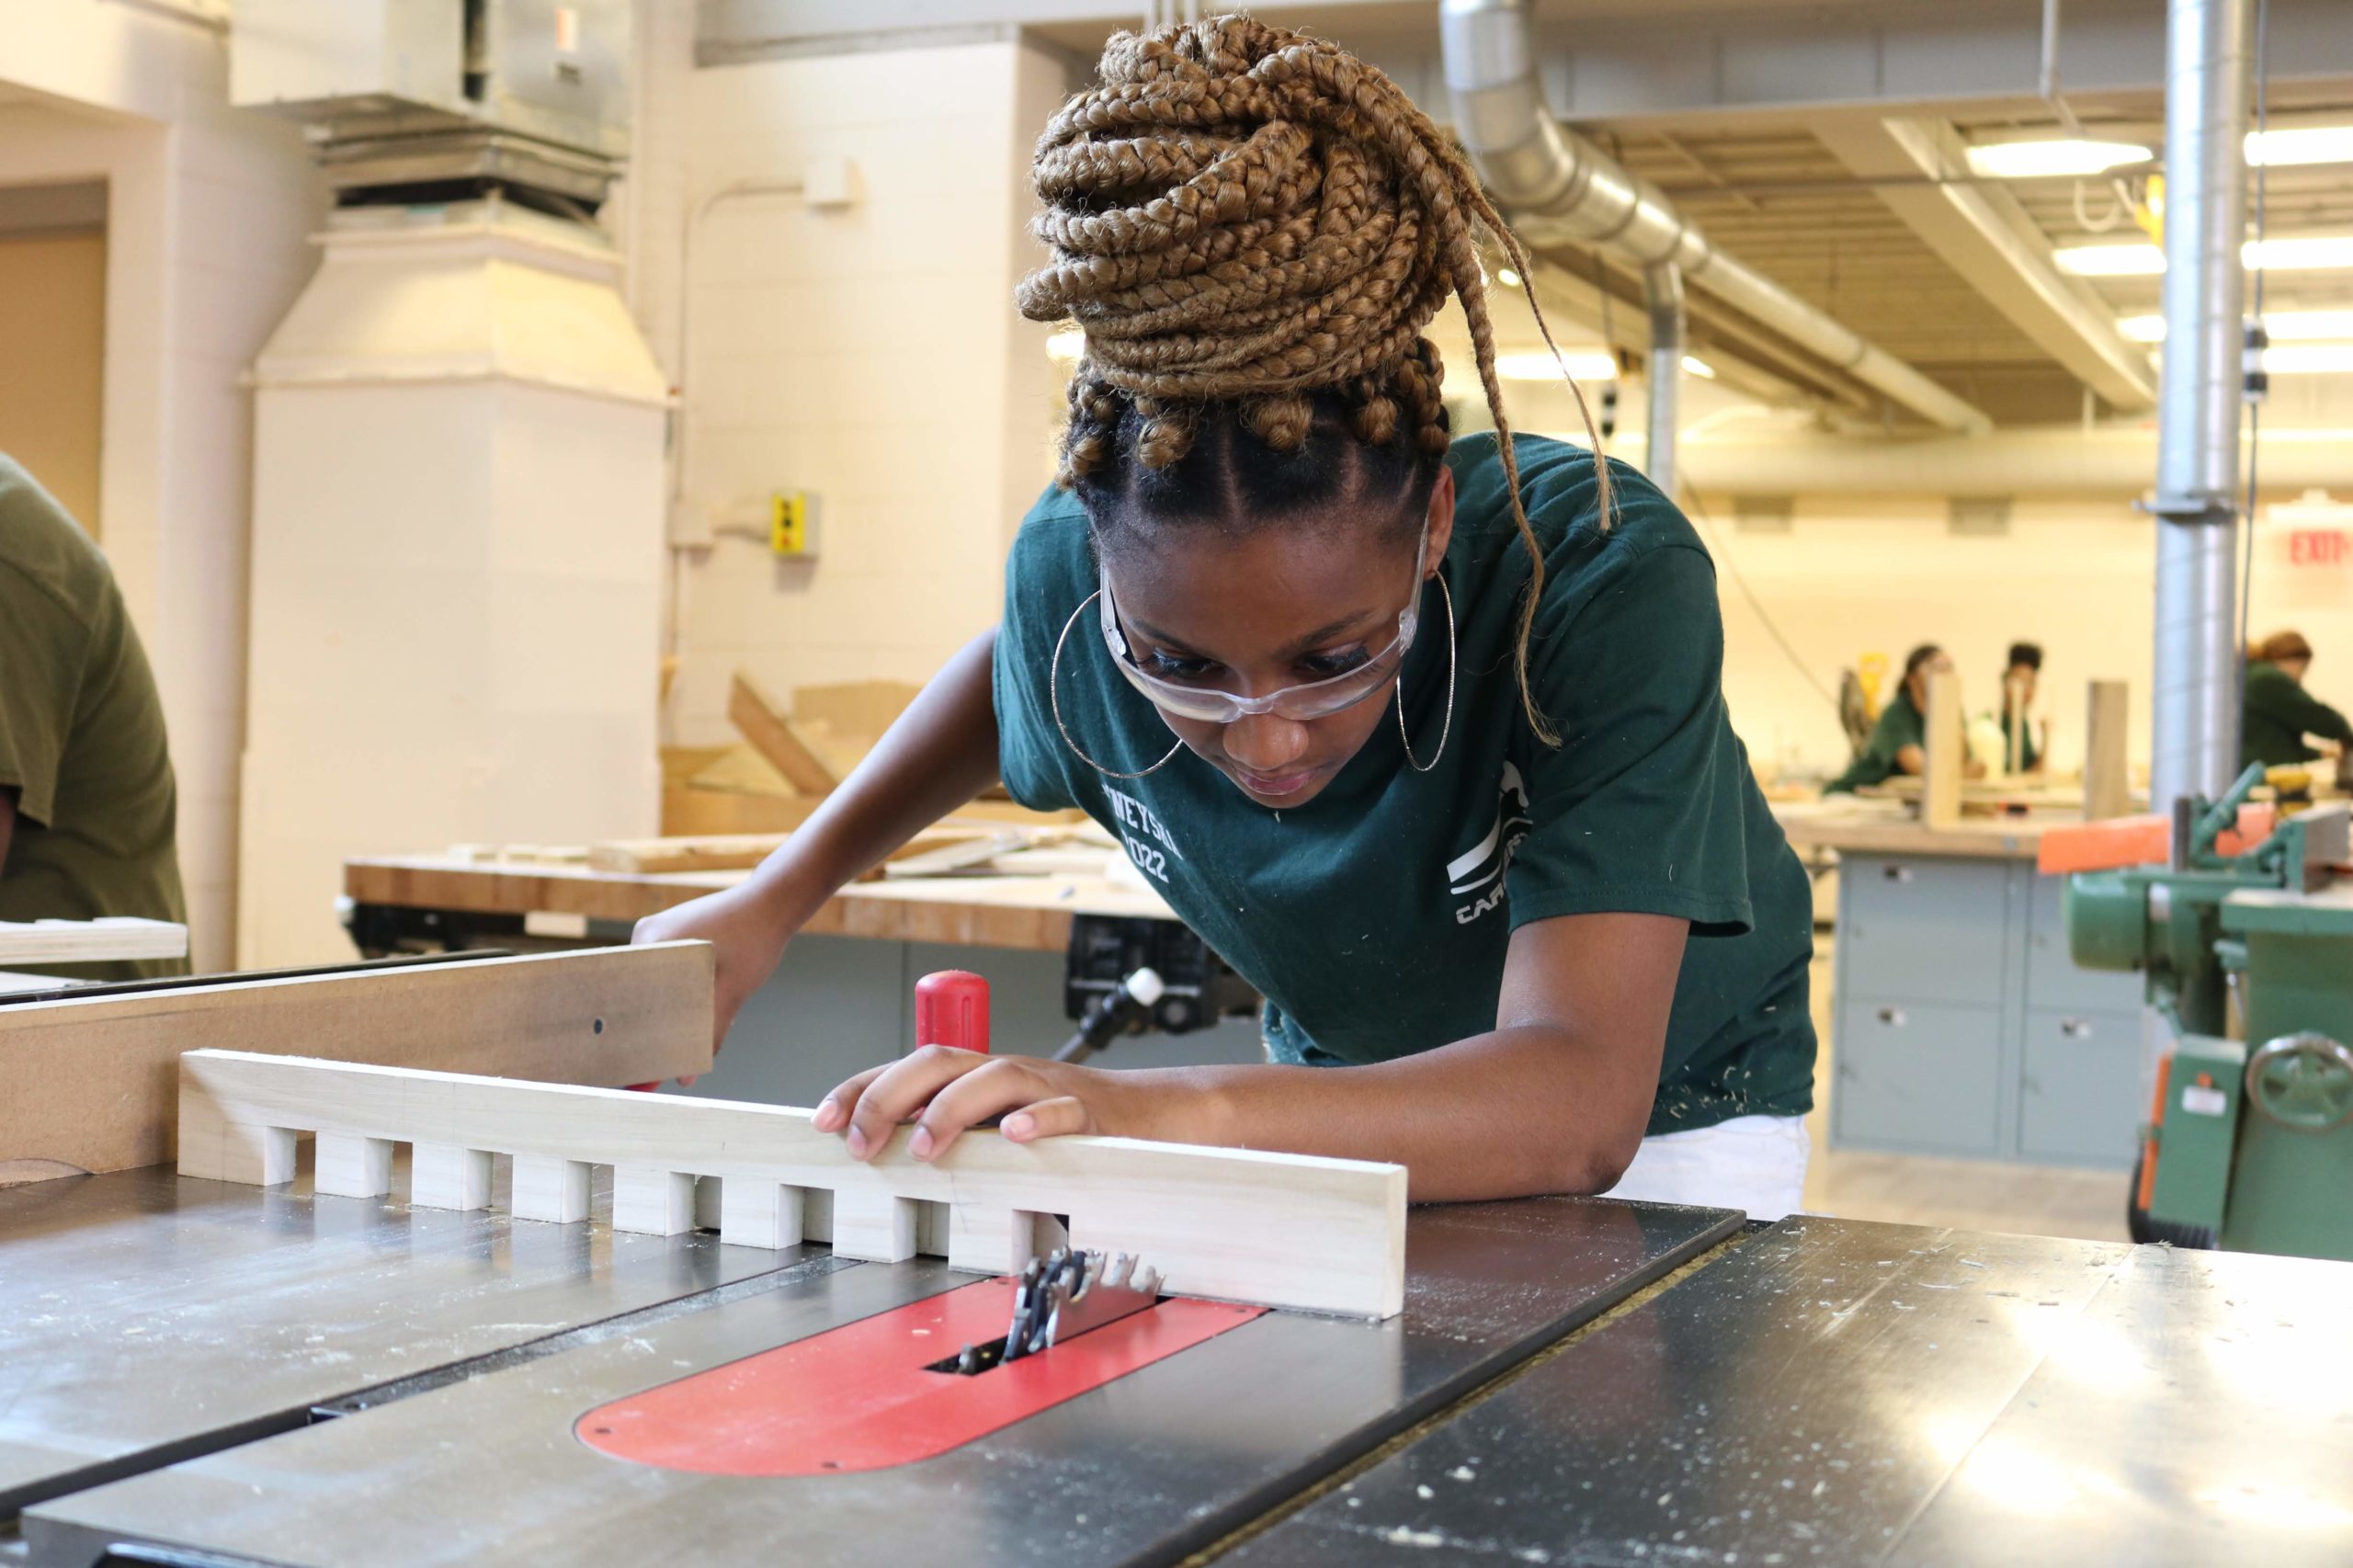 Carpentry - Connecticut Technical Education and Career System (CTECS)